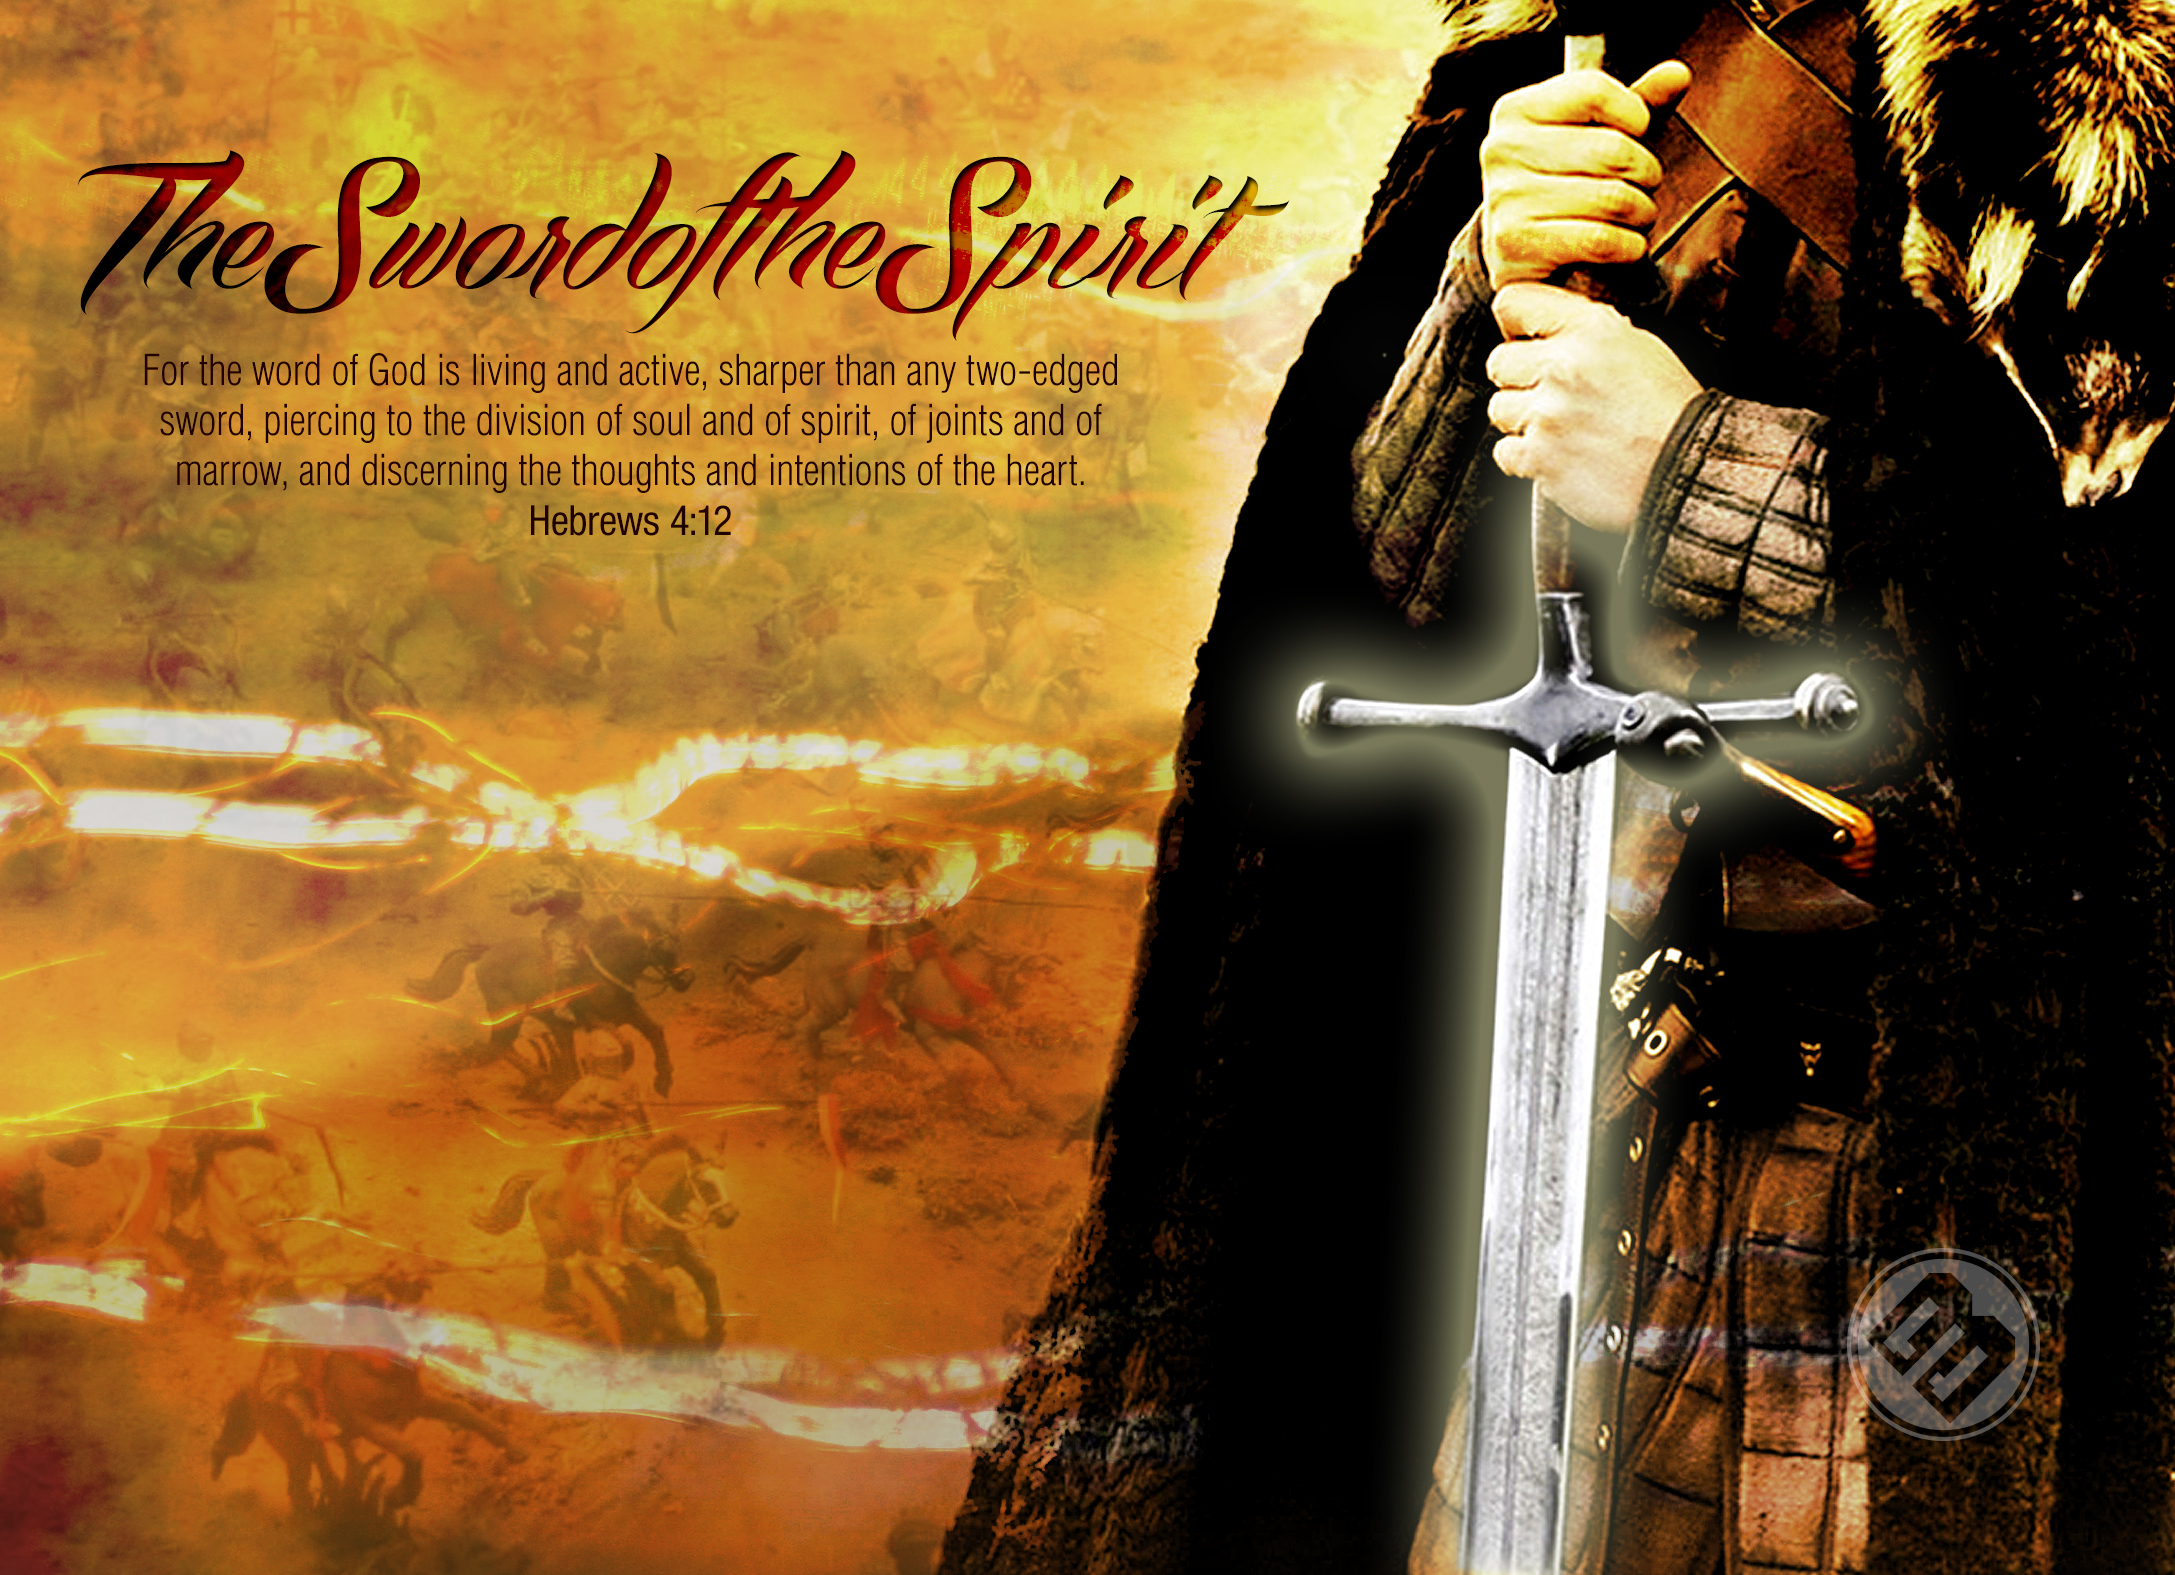 The Sword of the Spirit